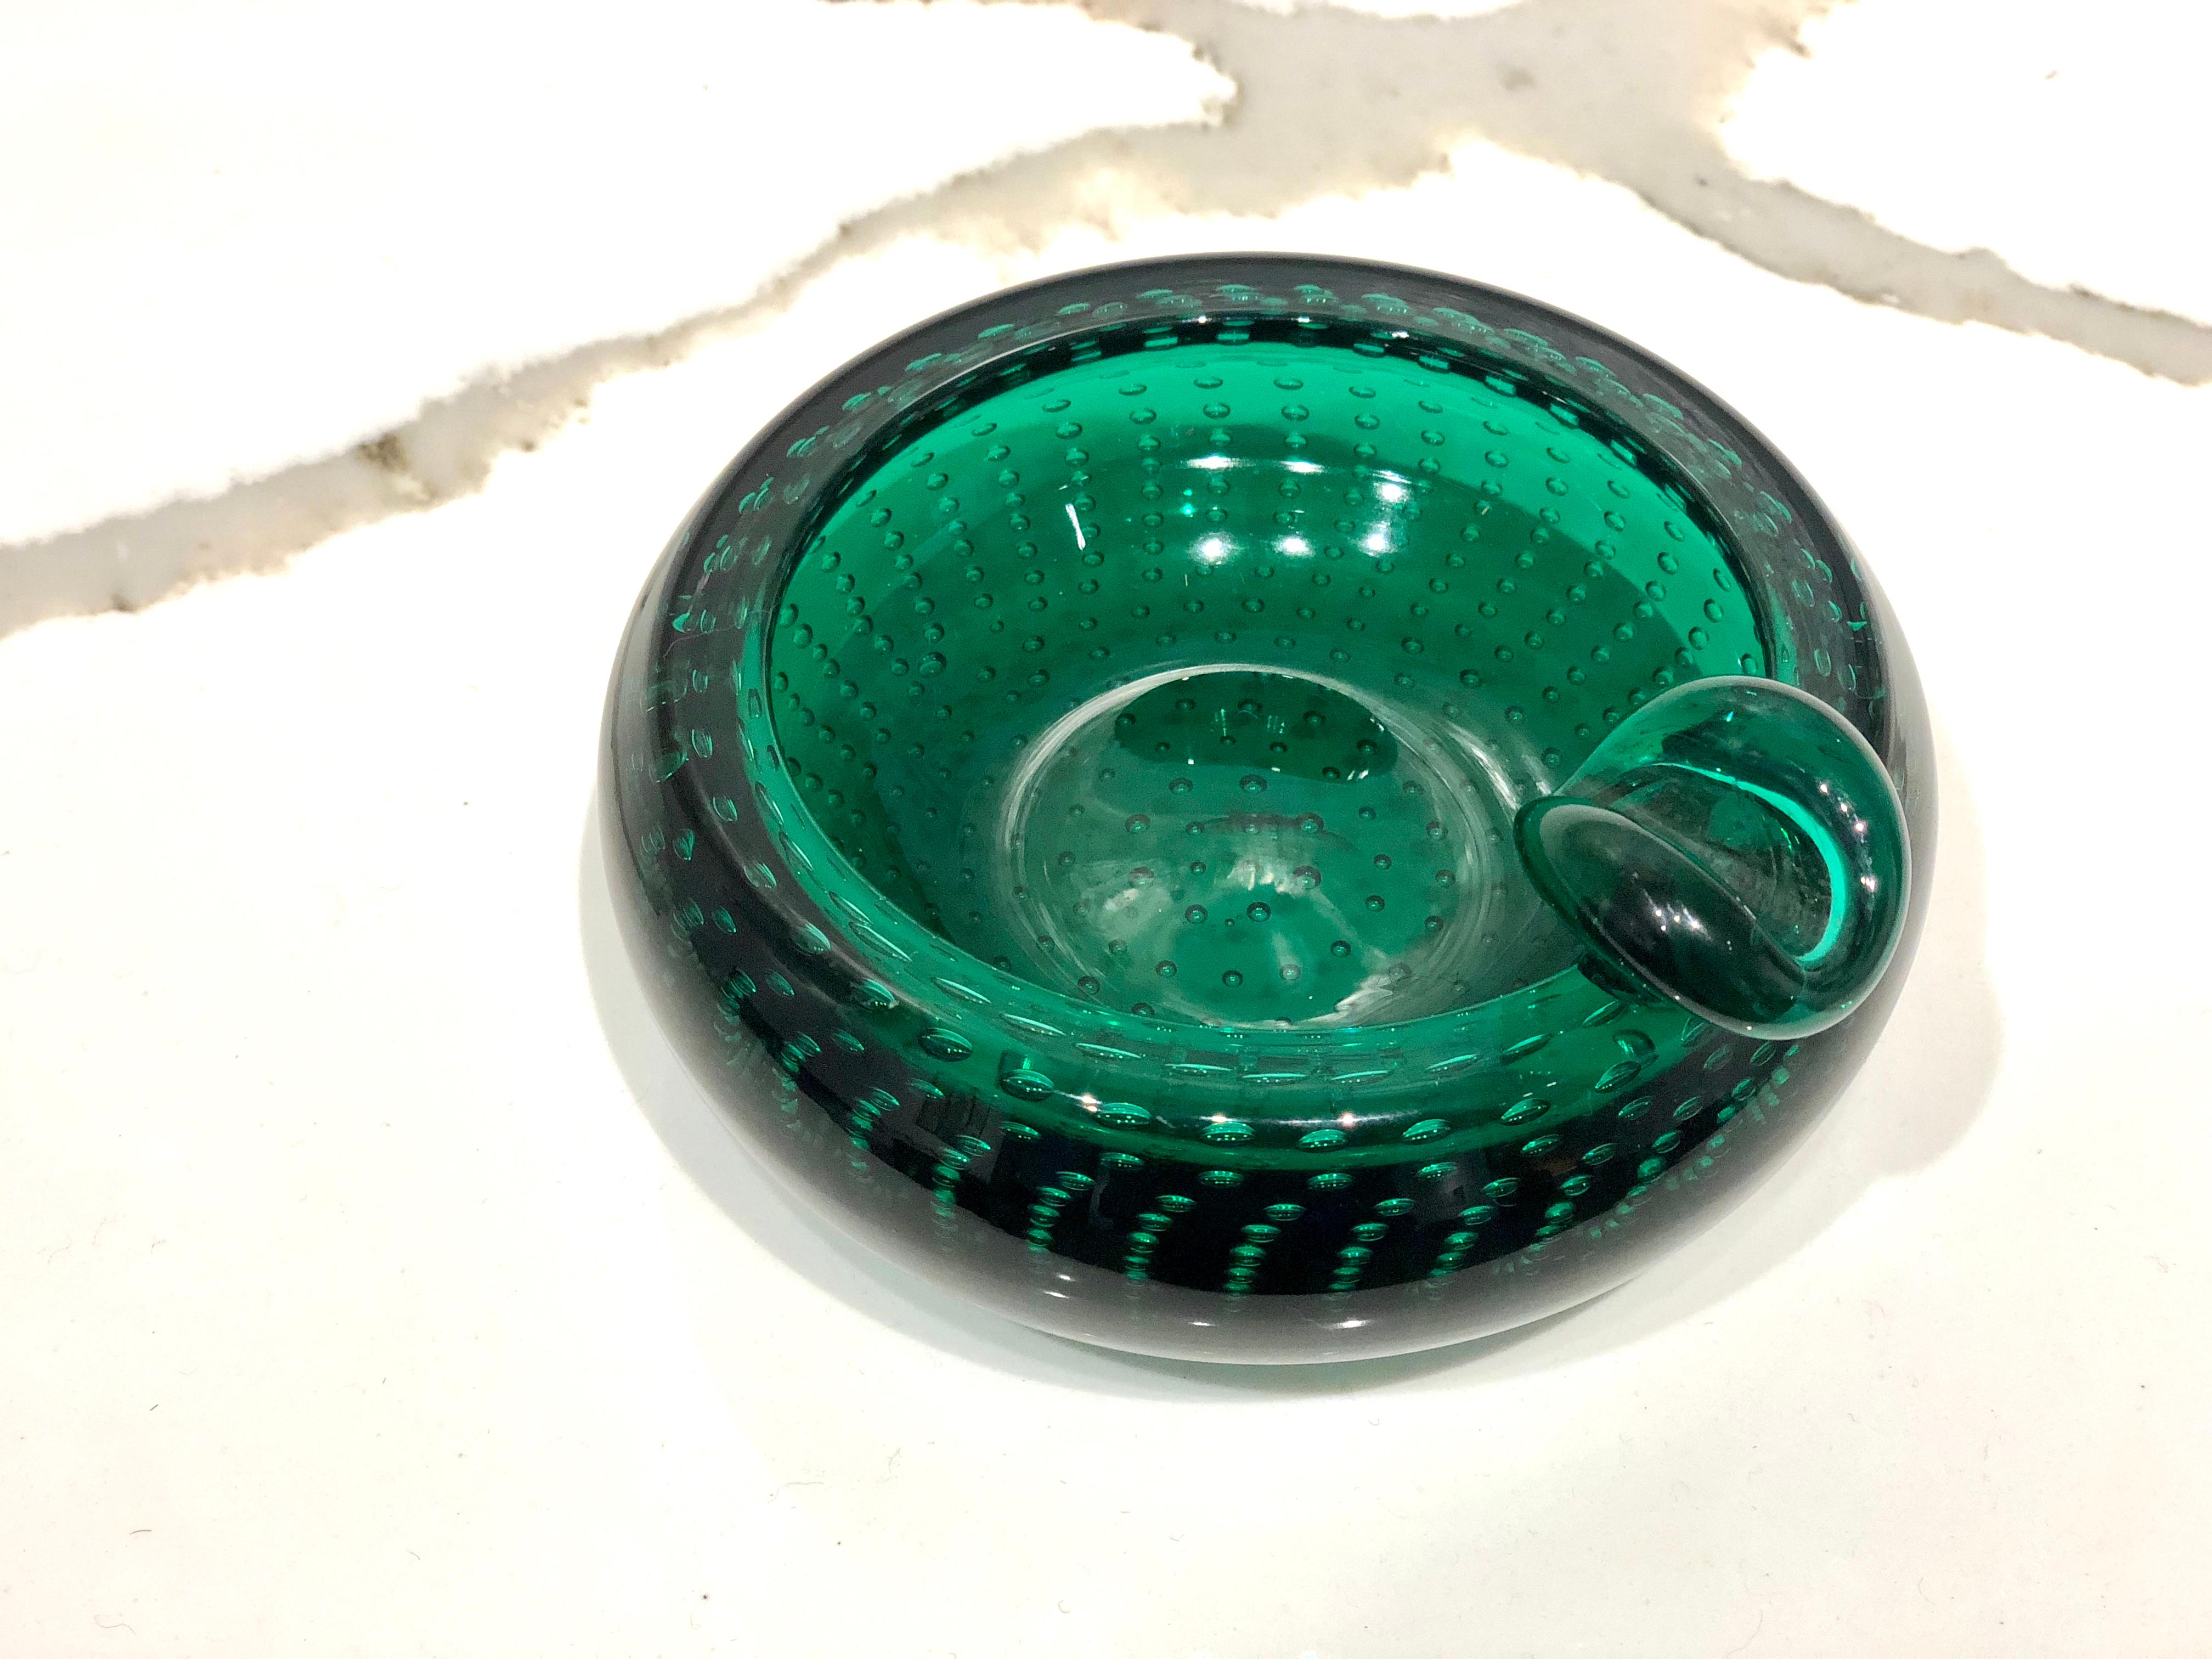 Incredible unique piece of thick green glass, simple elegant a very clean piece, no chips or scratches, circa 1970s, with air bubbles inside. Italian Murano beautiful.